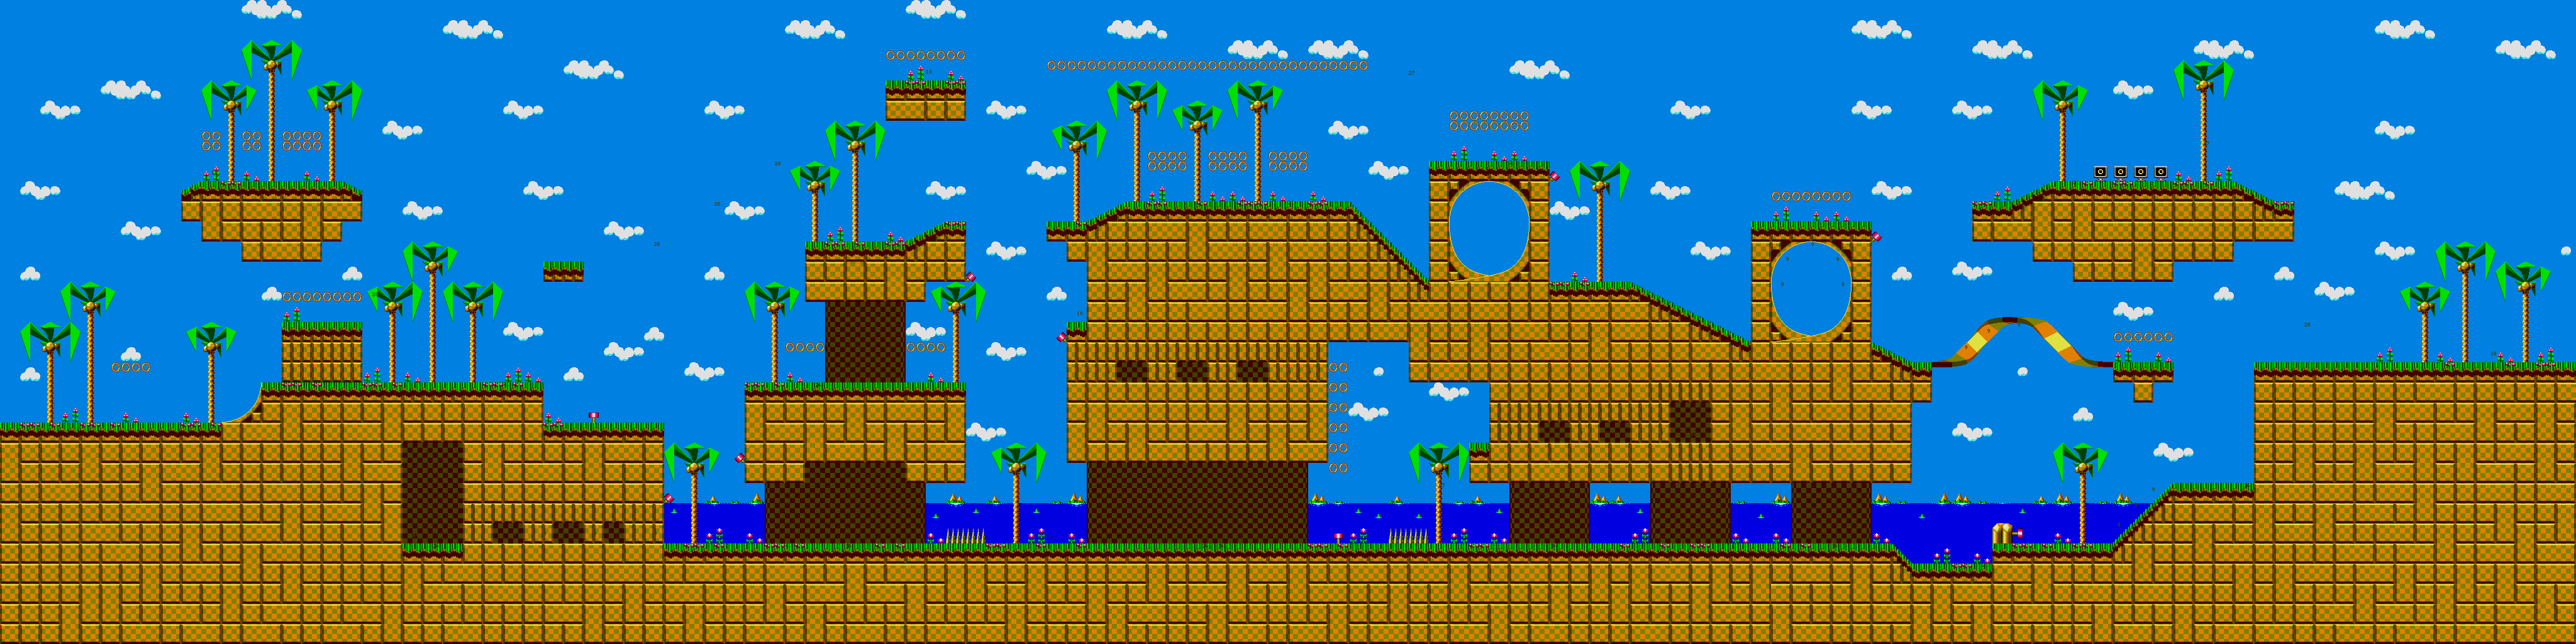 A+Start Son of a Glitch ✪ on X: Turquoise Hill Zone remake for Sonic Chaos.  Just mockups of what I think it would look like. WIP. #Sonicchaosremake  #pixelart #Gamedev  / X